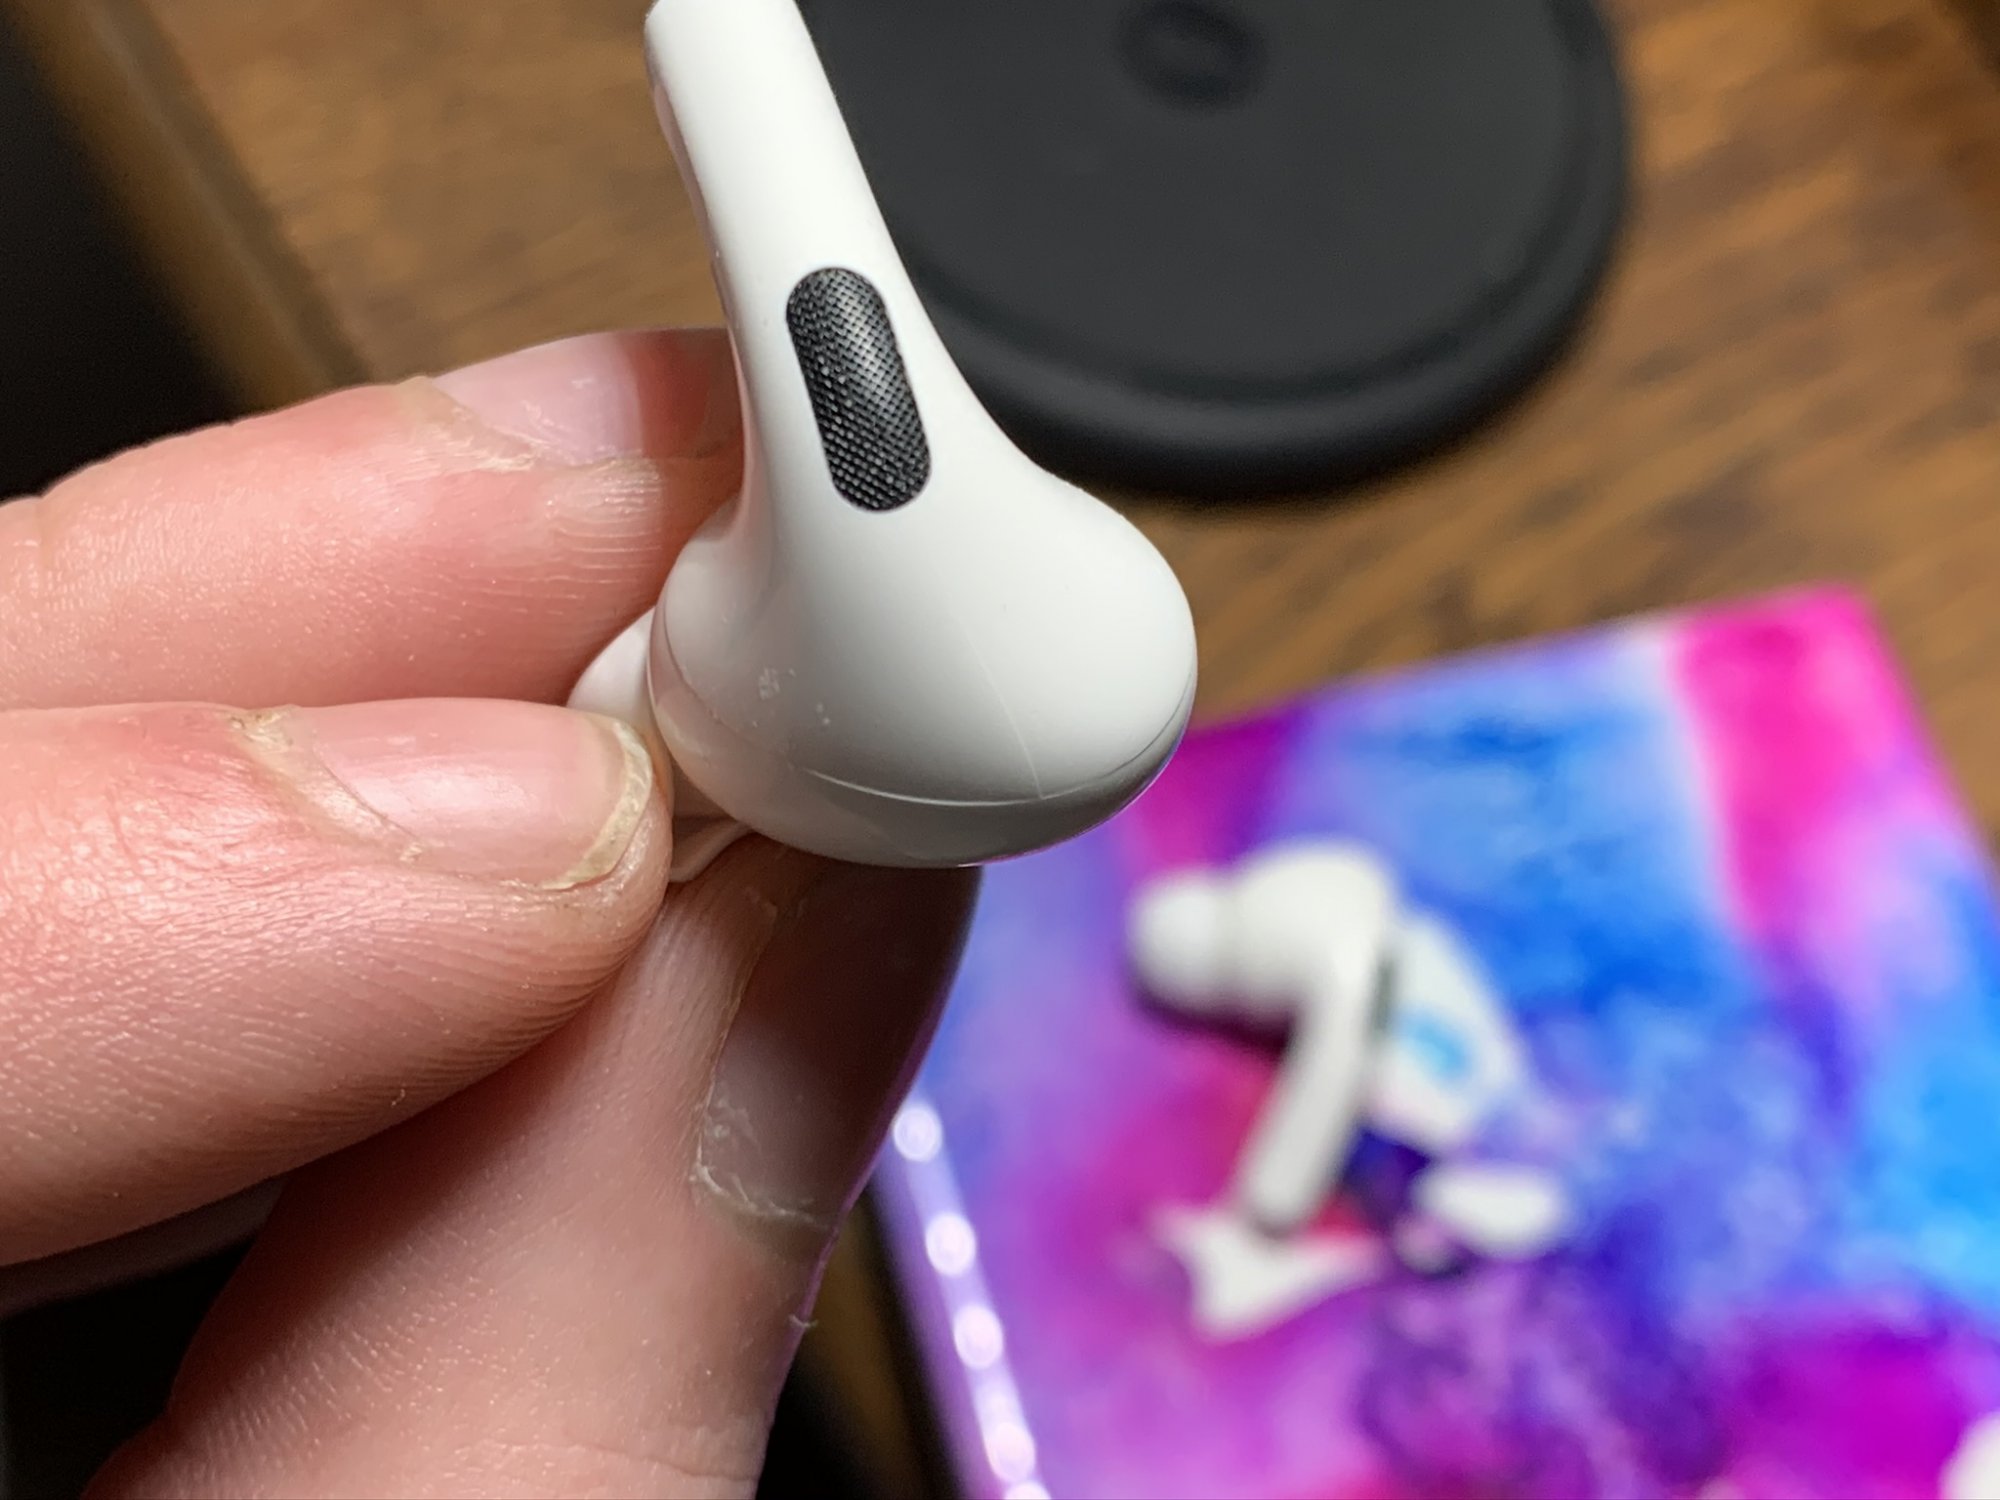 Hairline crack on airpods pro - Apple Community